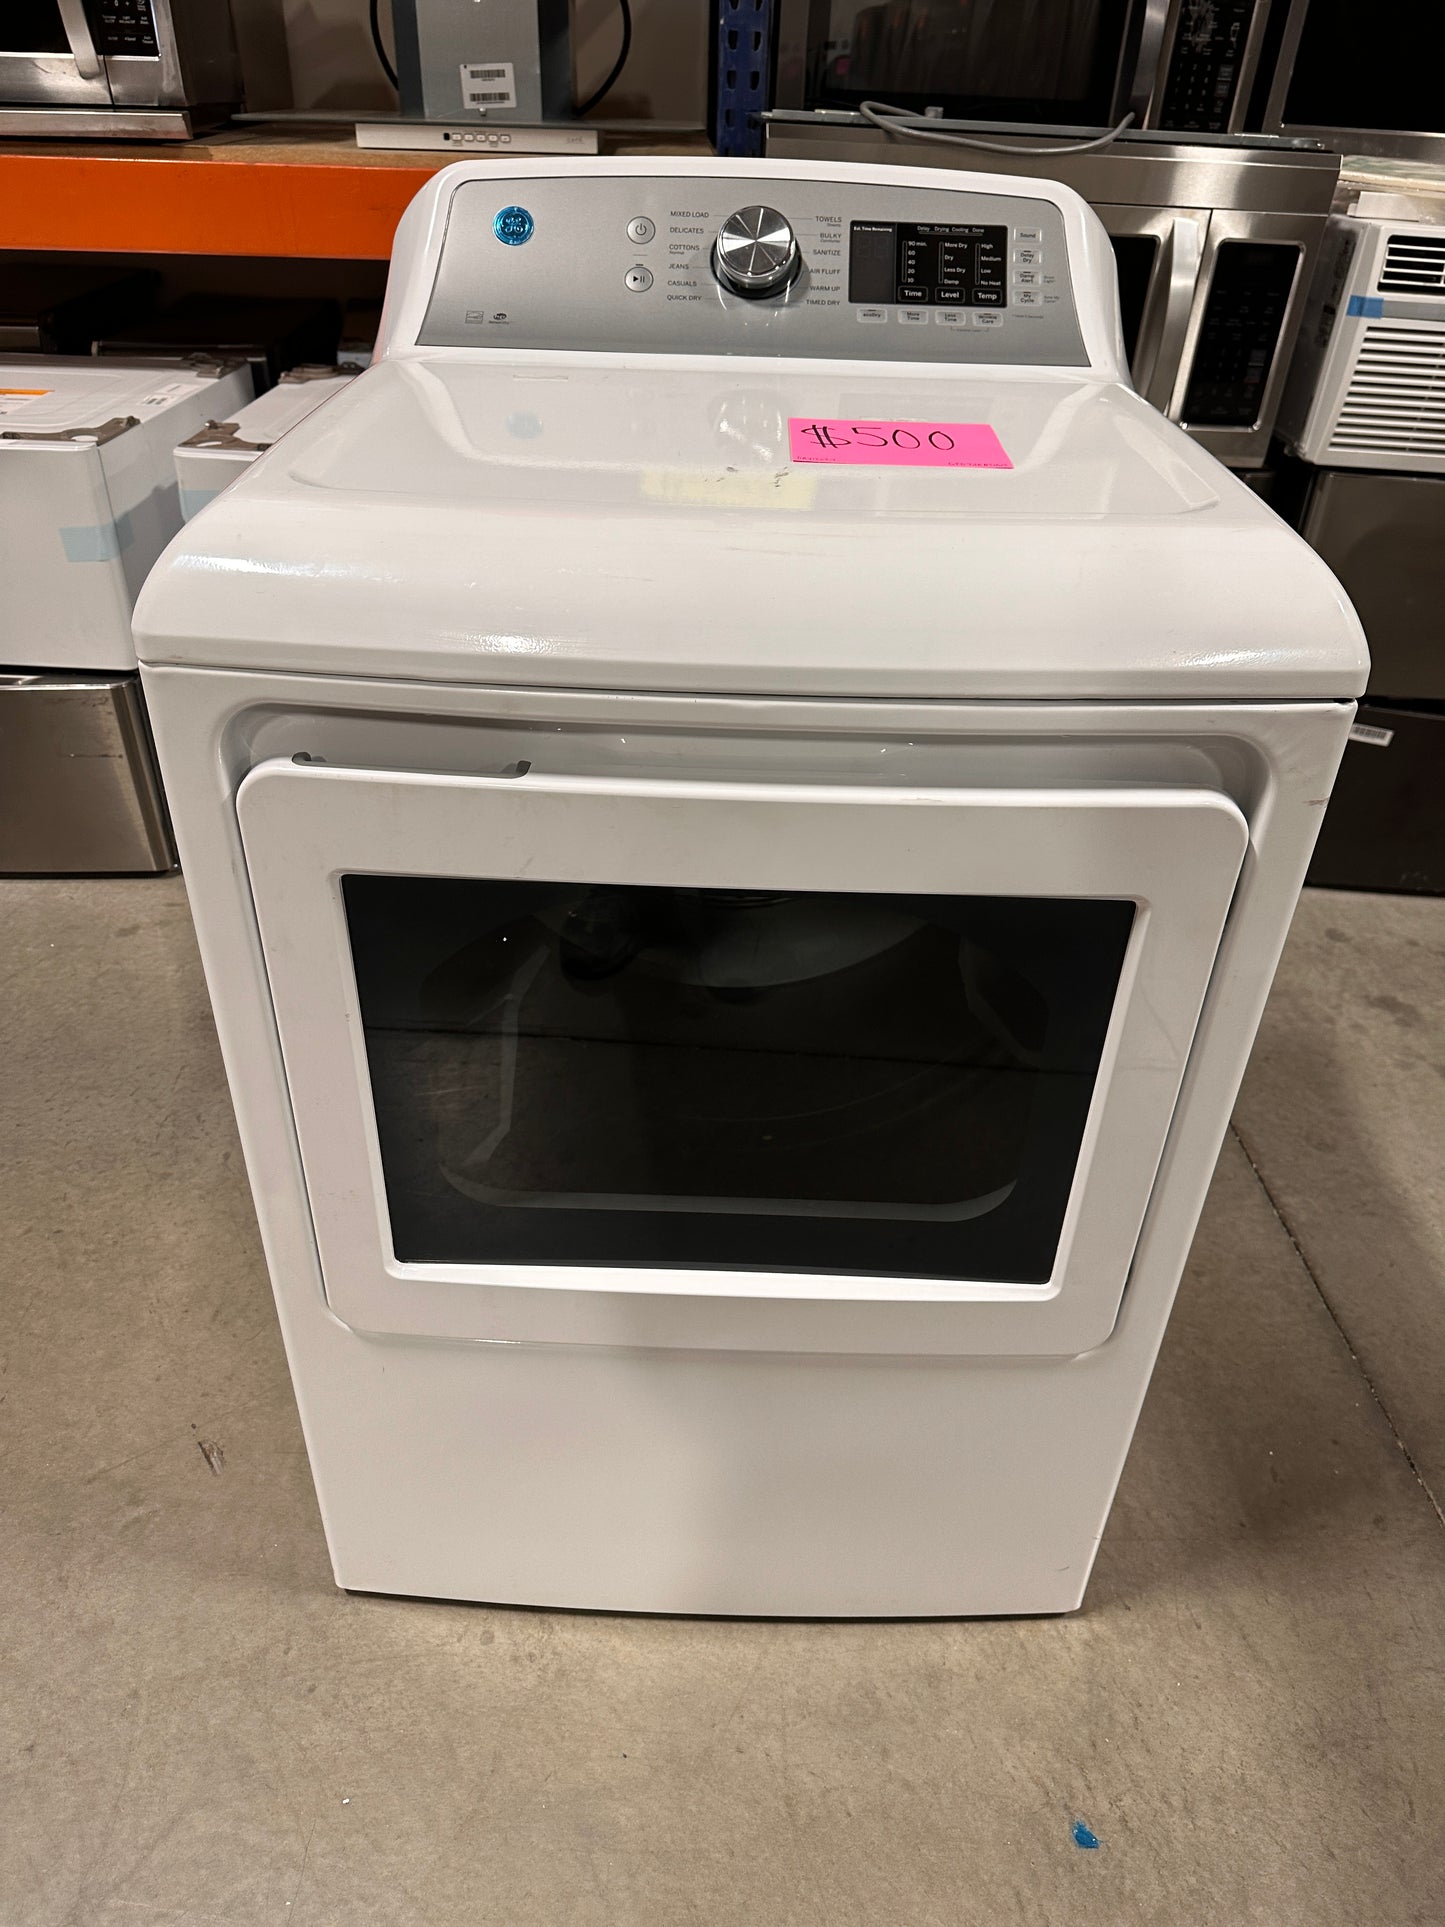 NEW GE WHITE ELECTRIC DRYER - DRY12024